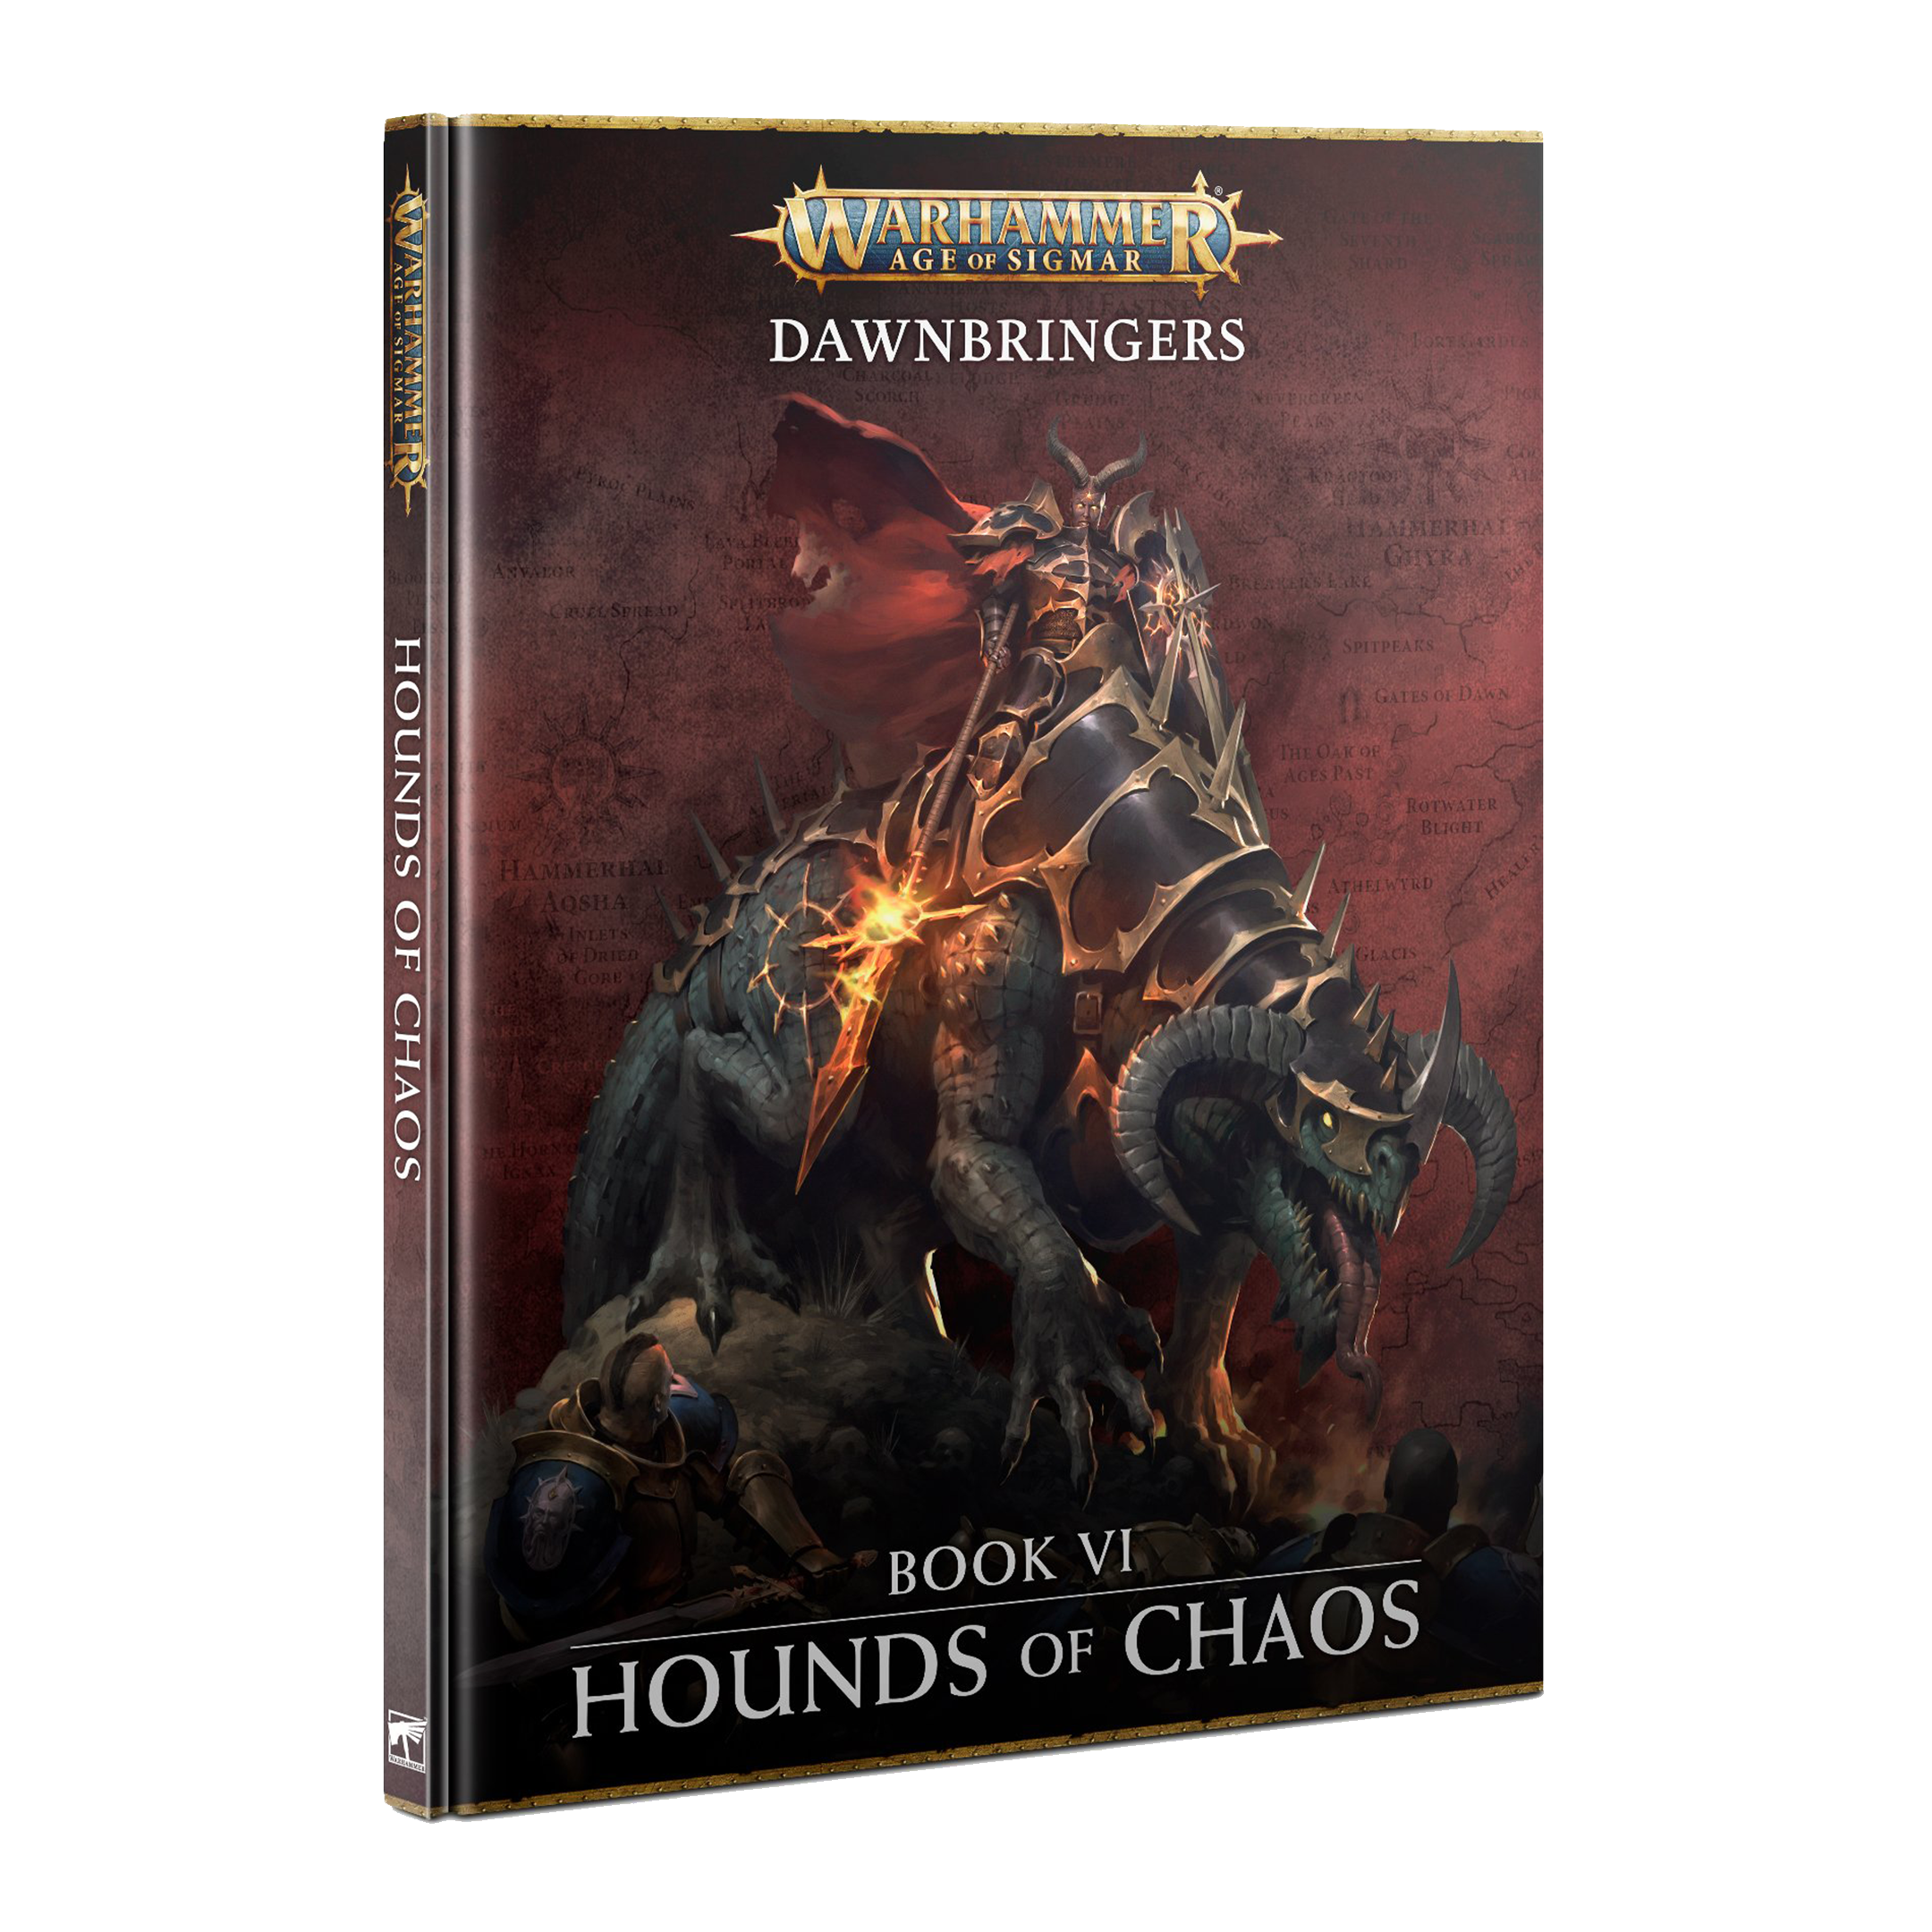 Dawnbringers: Hounds of Chaos